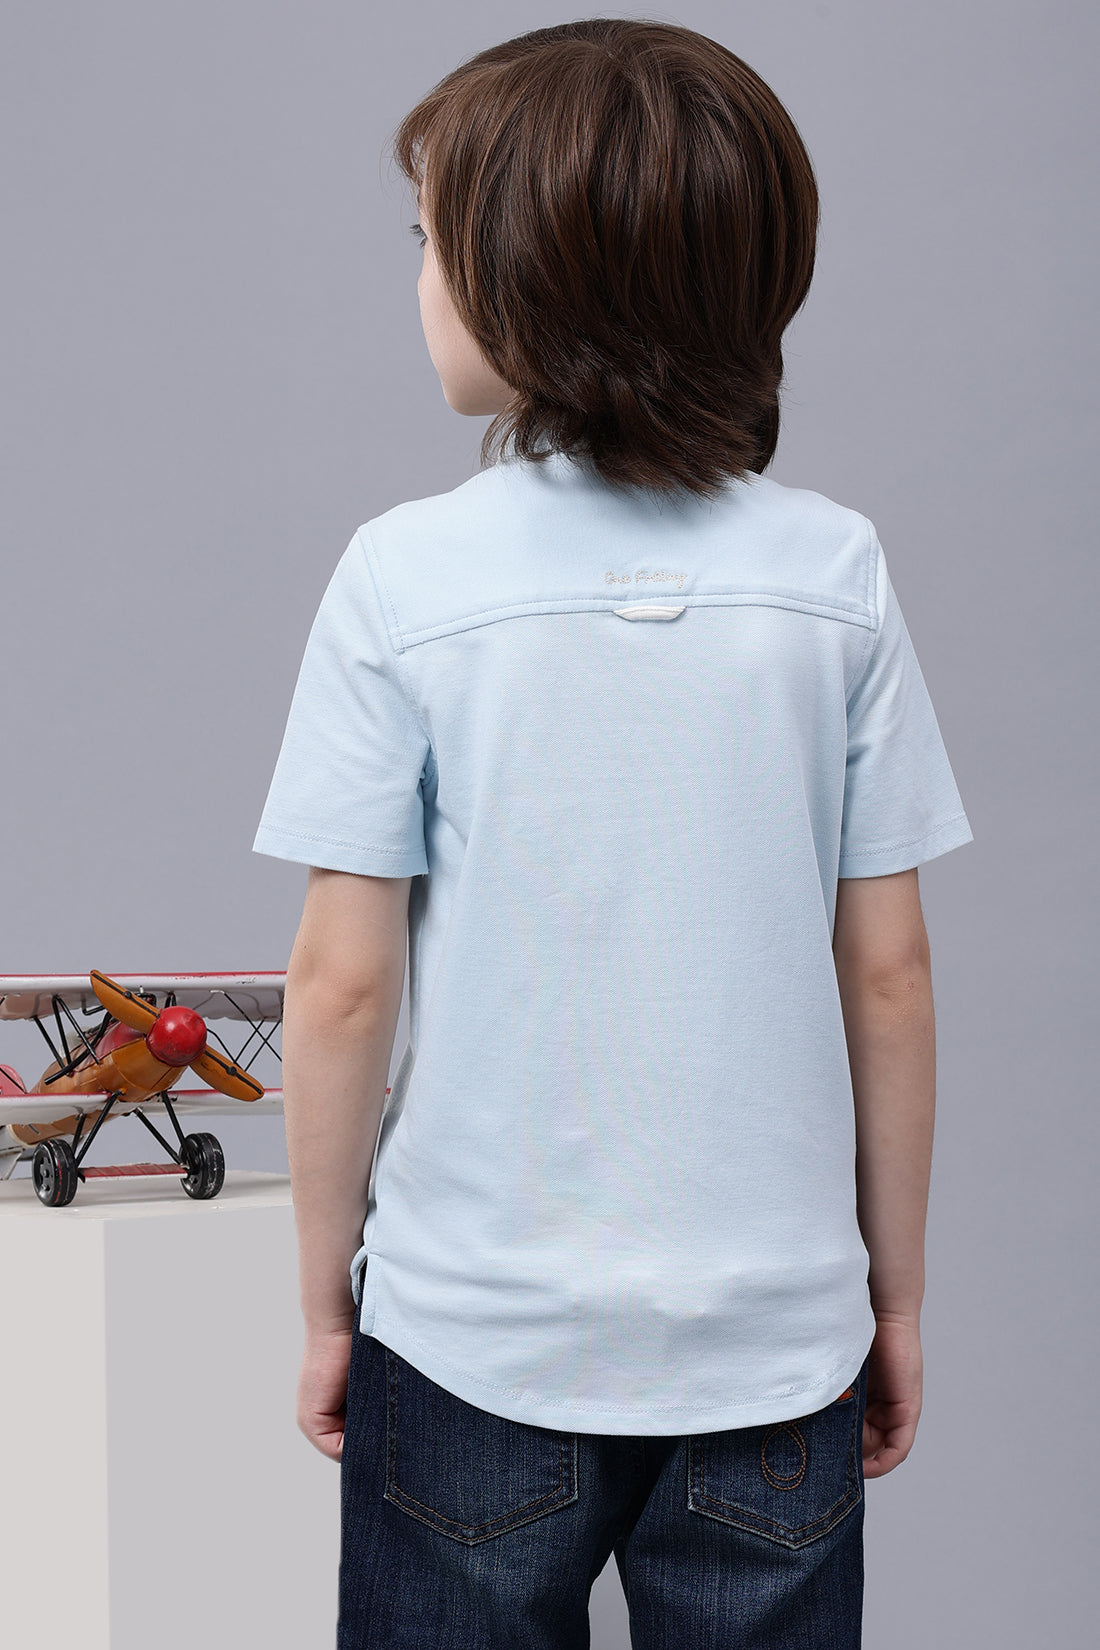 One Friday Kids Boys Blue Cotton Chinese Collar Shirt